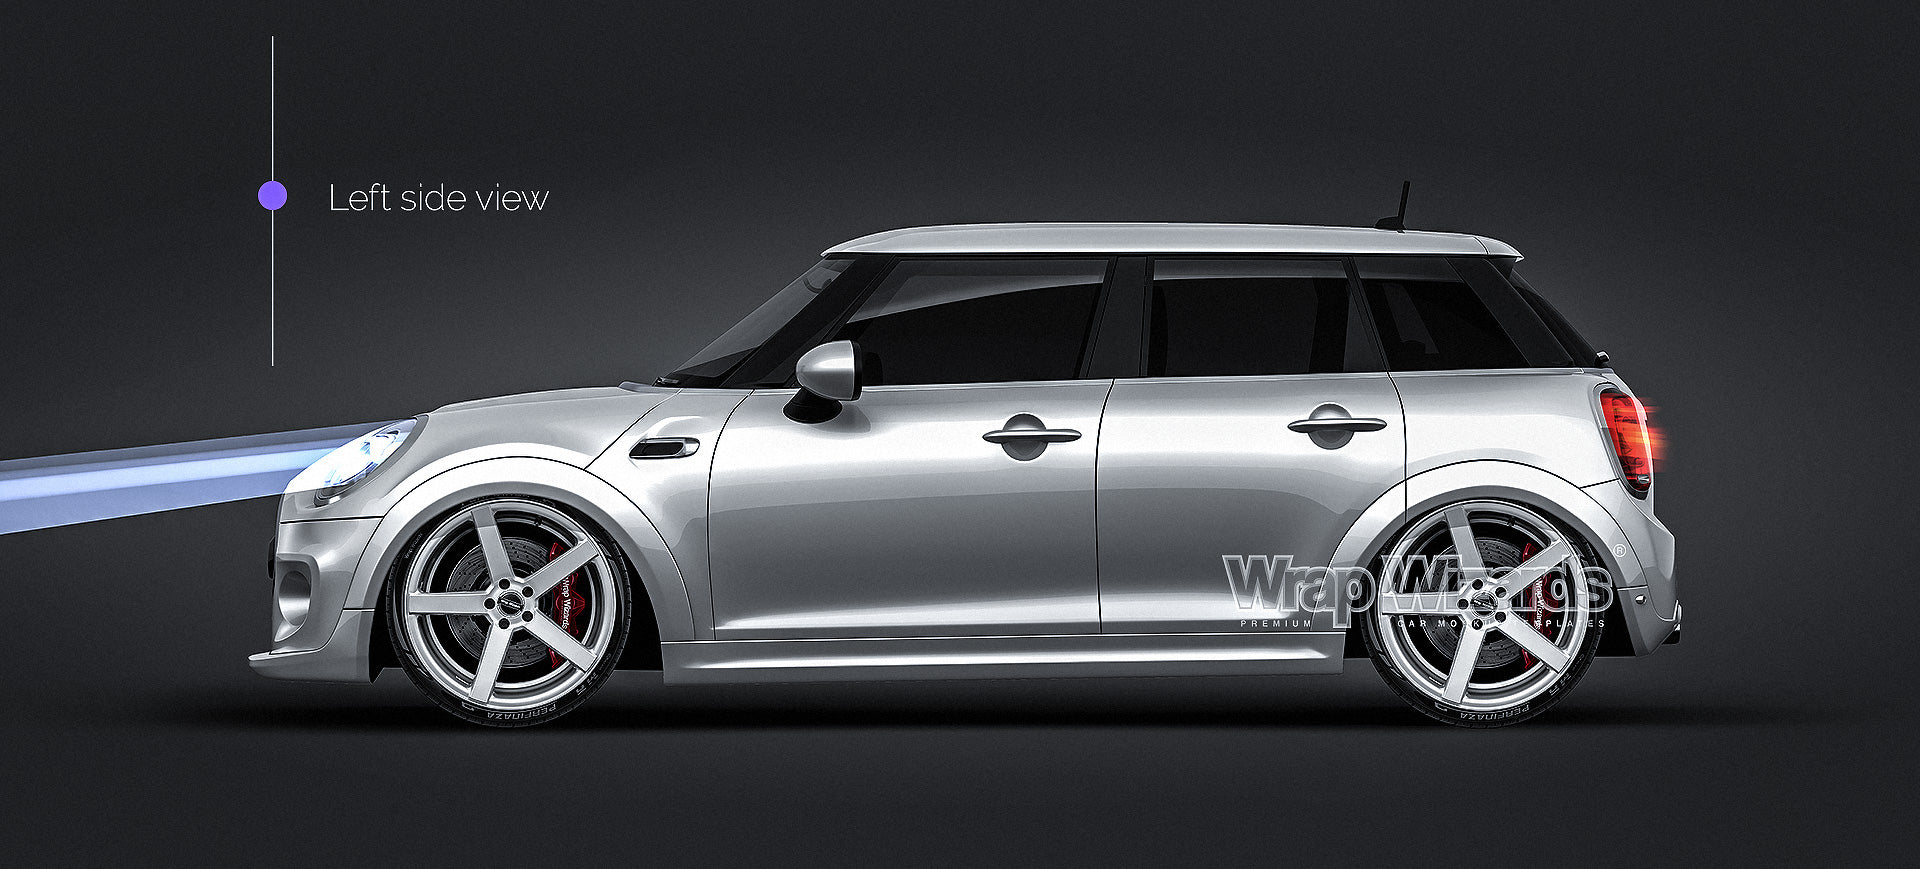 Mini Cooper 5-door 2015 glossy finish - all sides Car Mockup Template.psd